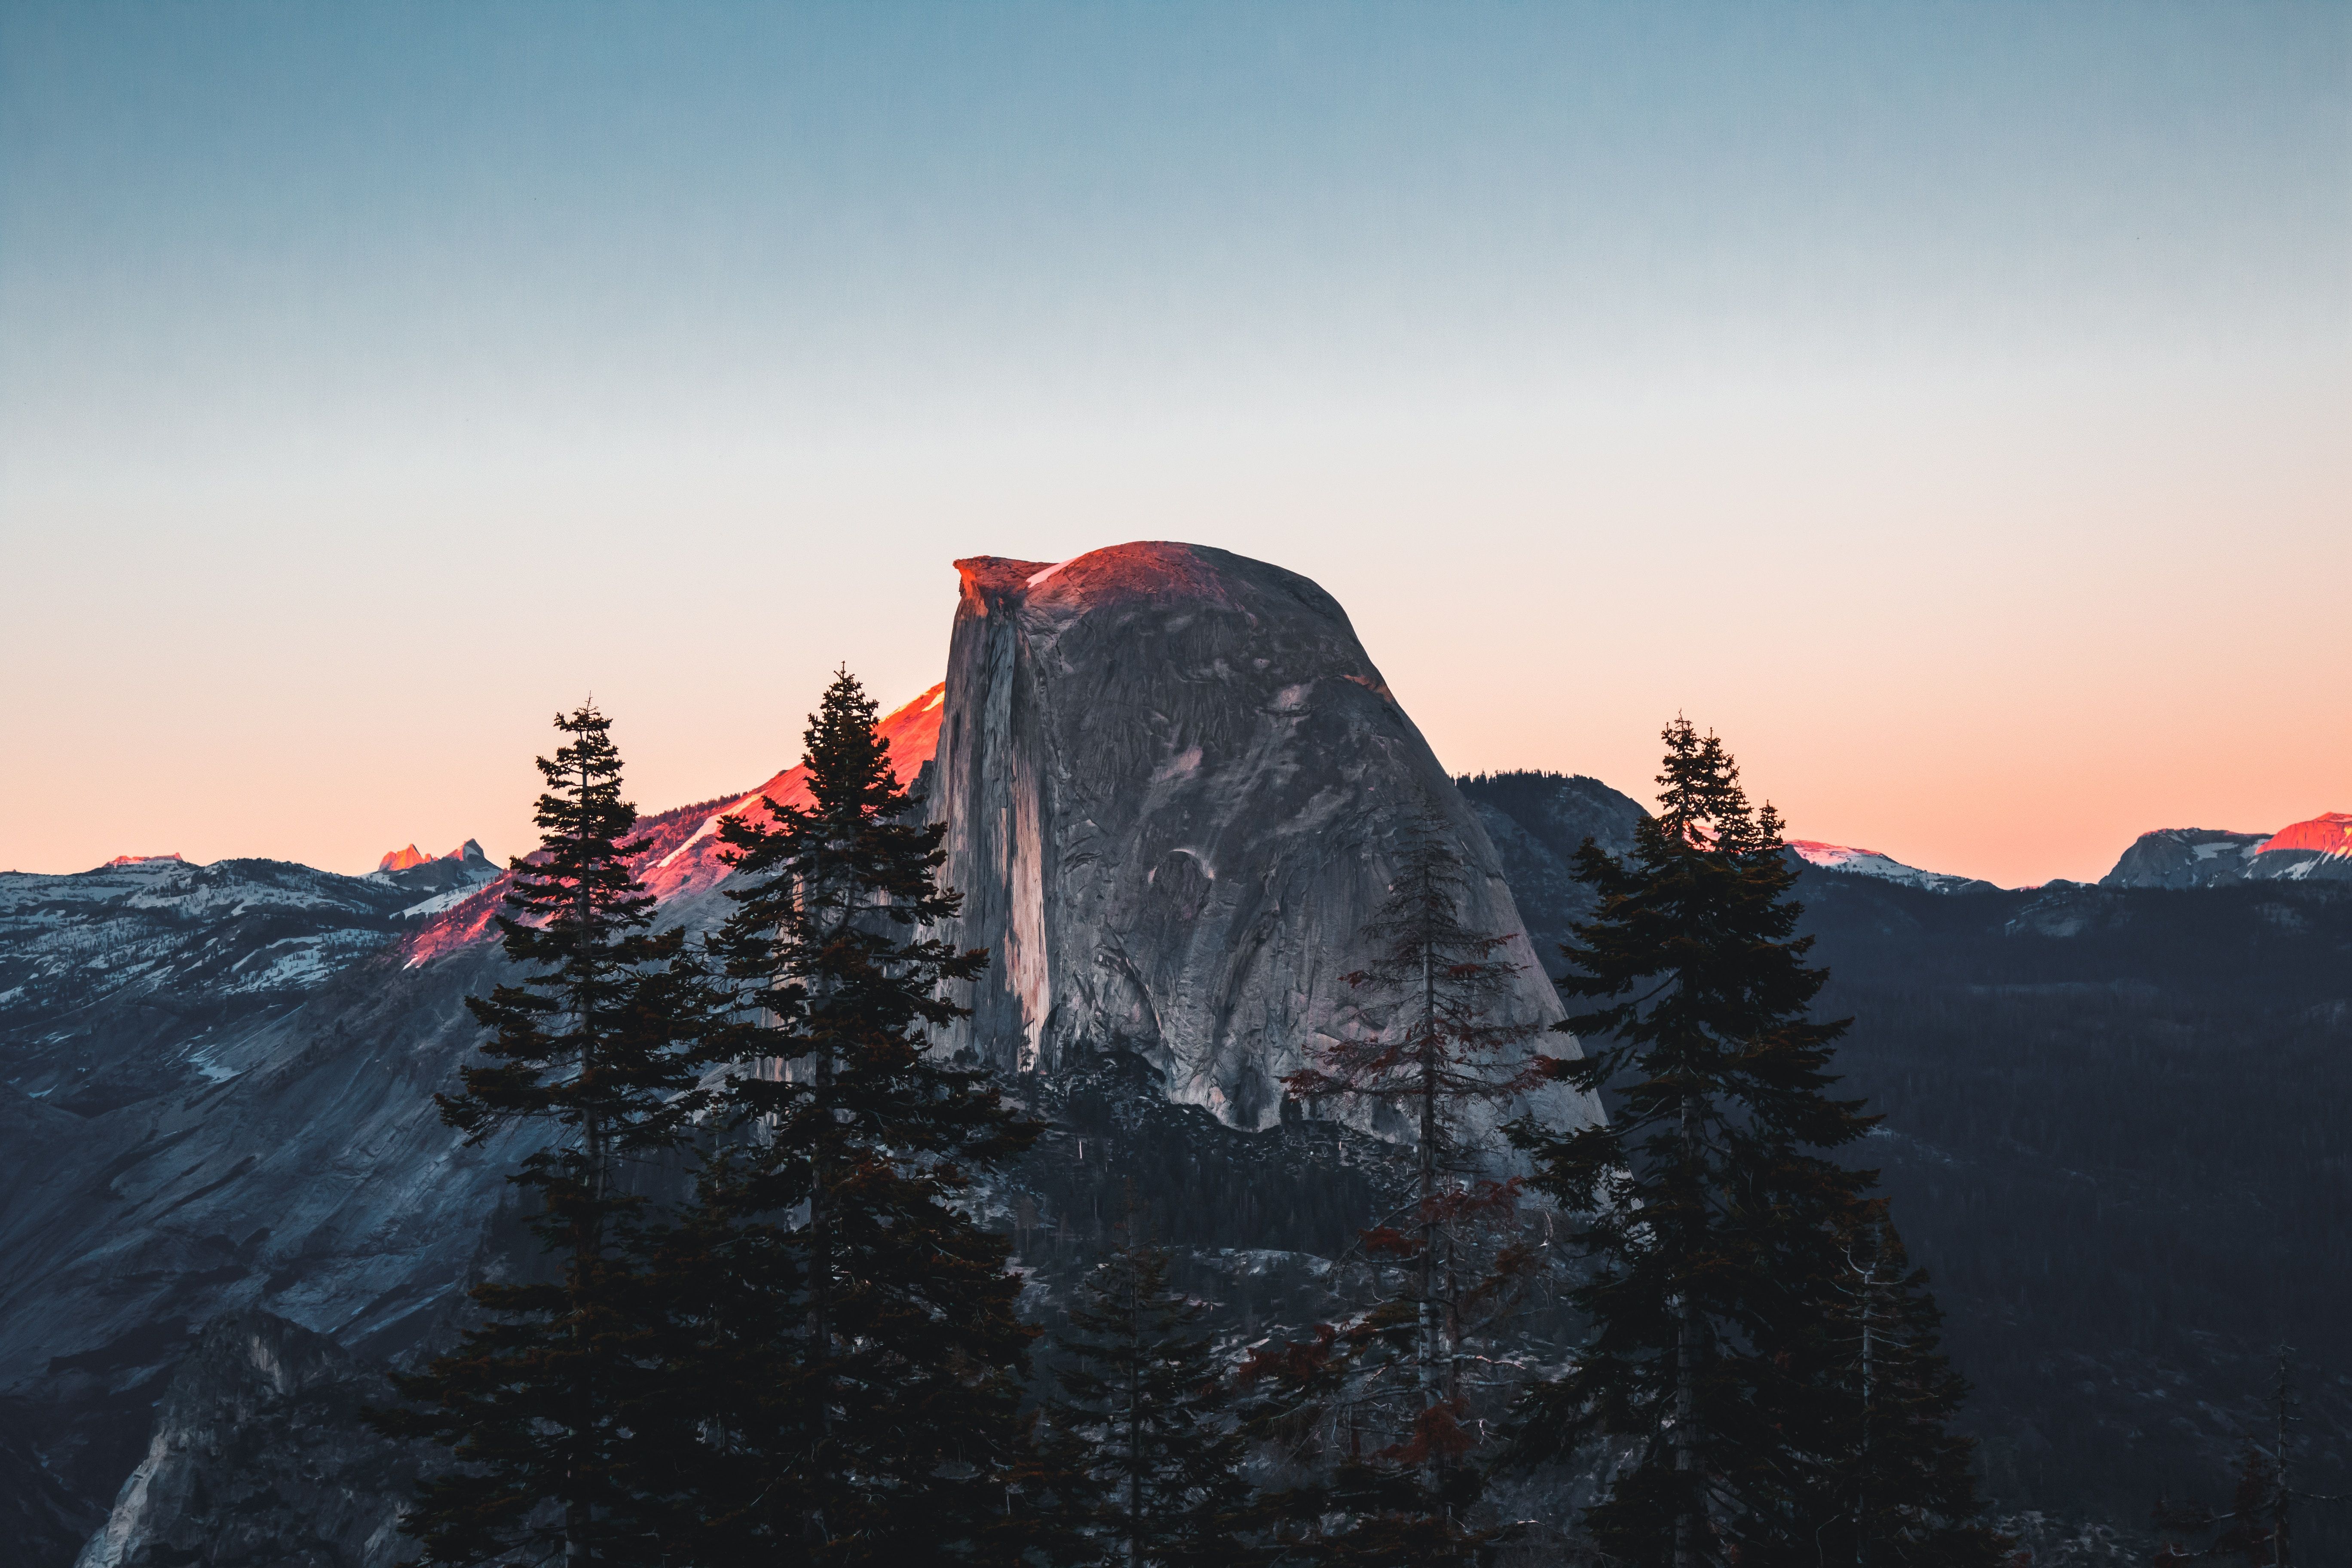 5472x3648 #half dome, #climbing, #Free picture, #desktop background, #road trip, #tree, #wallpaper, #rock, #hiking, #national park, #nature, #landscape, #wallpaper, #desktop background, #mountain, #forest, #sunset, #cliff, #amazing wallpaper